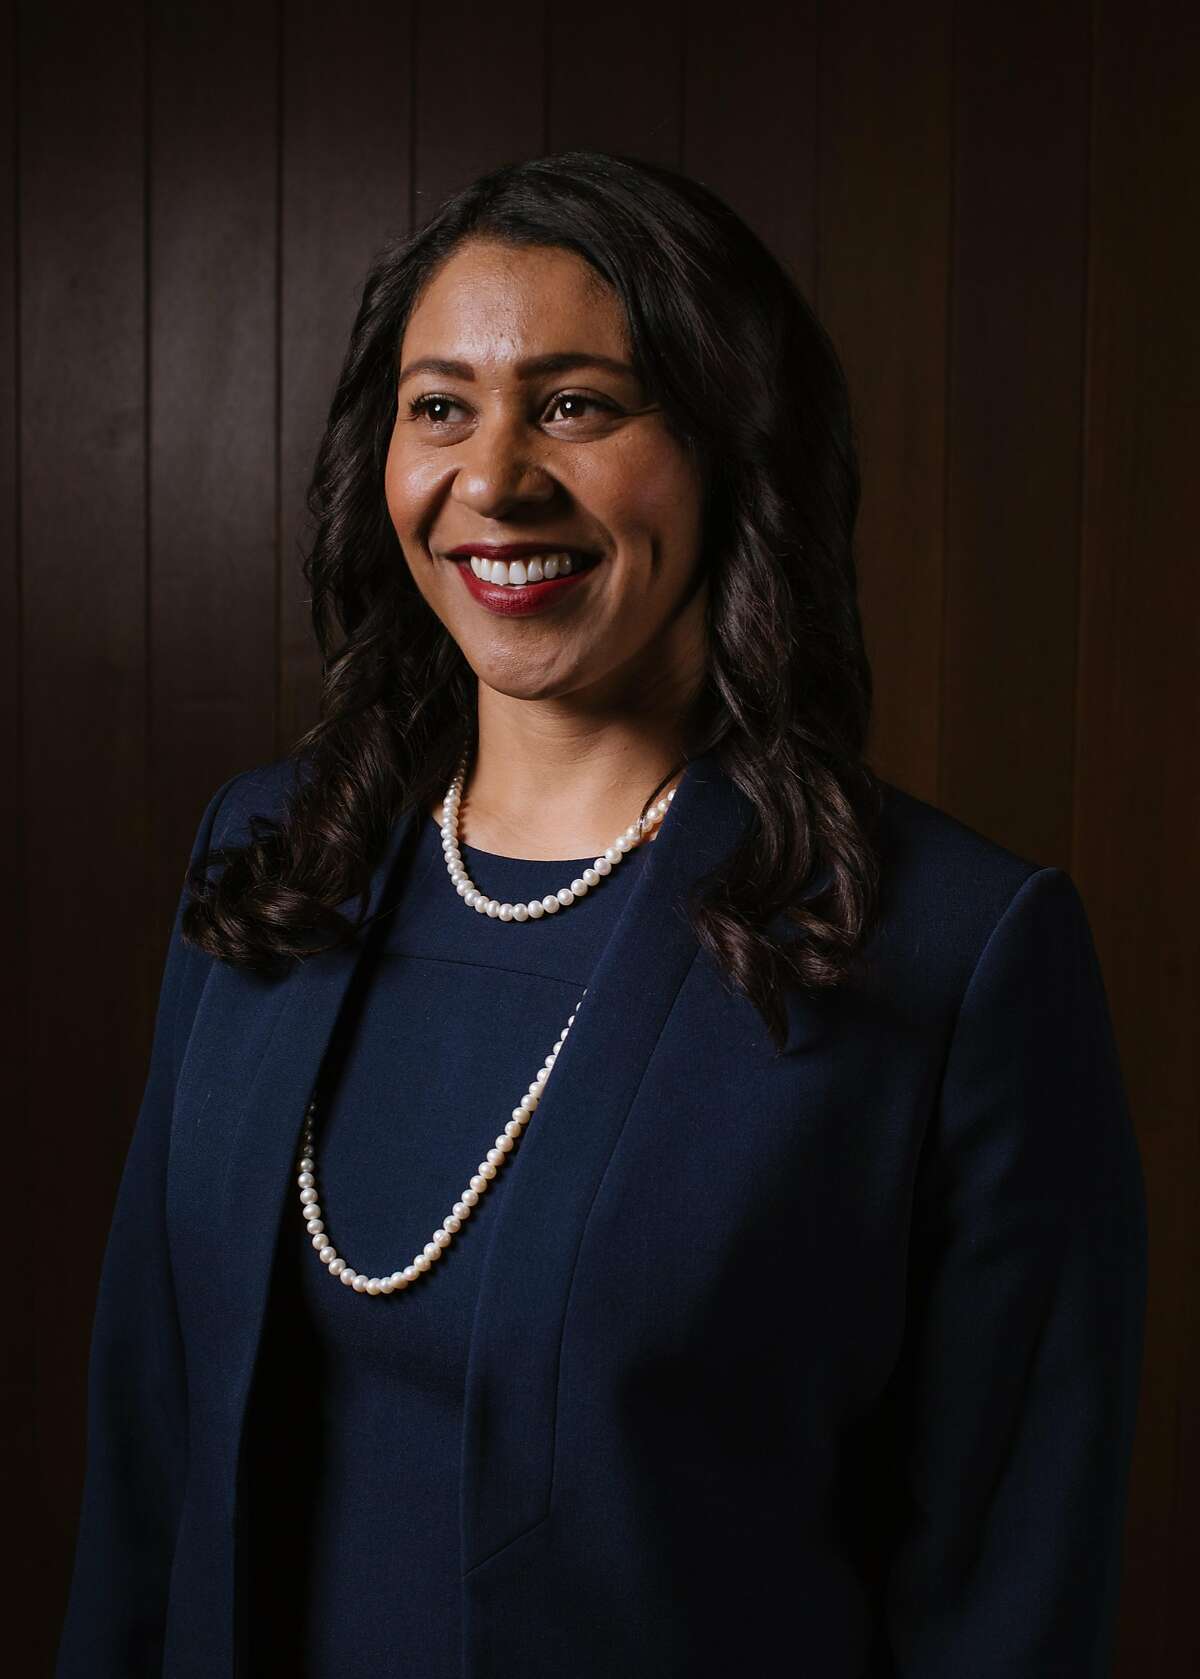 London Breed, San Francisco mayoral candidate, and President of the San Francisco Board of Supervisors, photographed on location at the San Francisco Chronicle offices on March 29th, 2018.